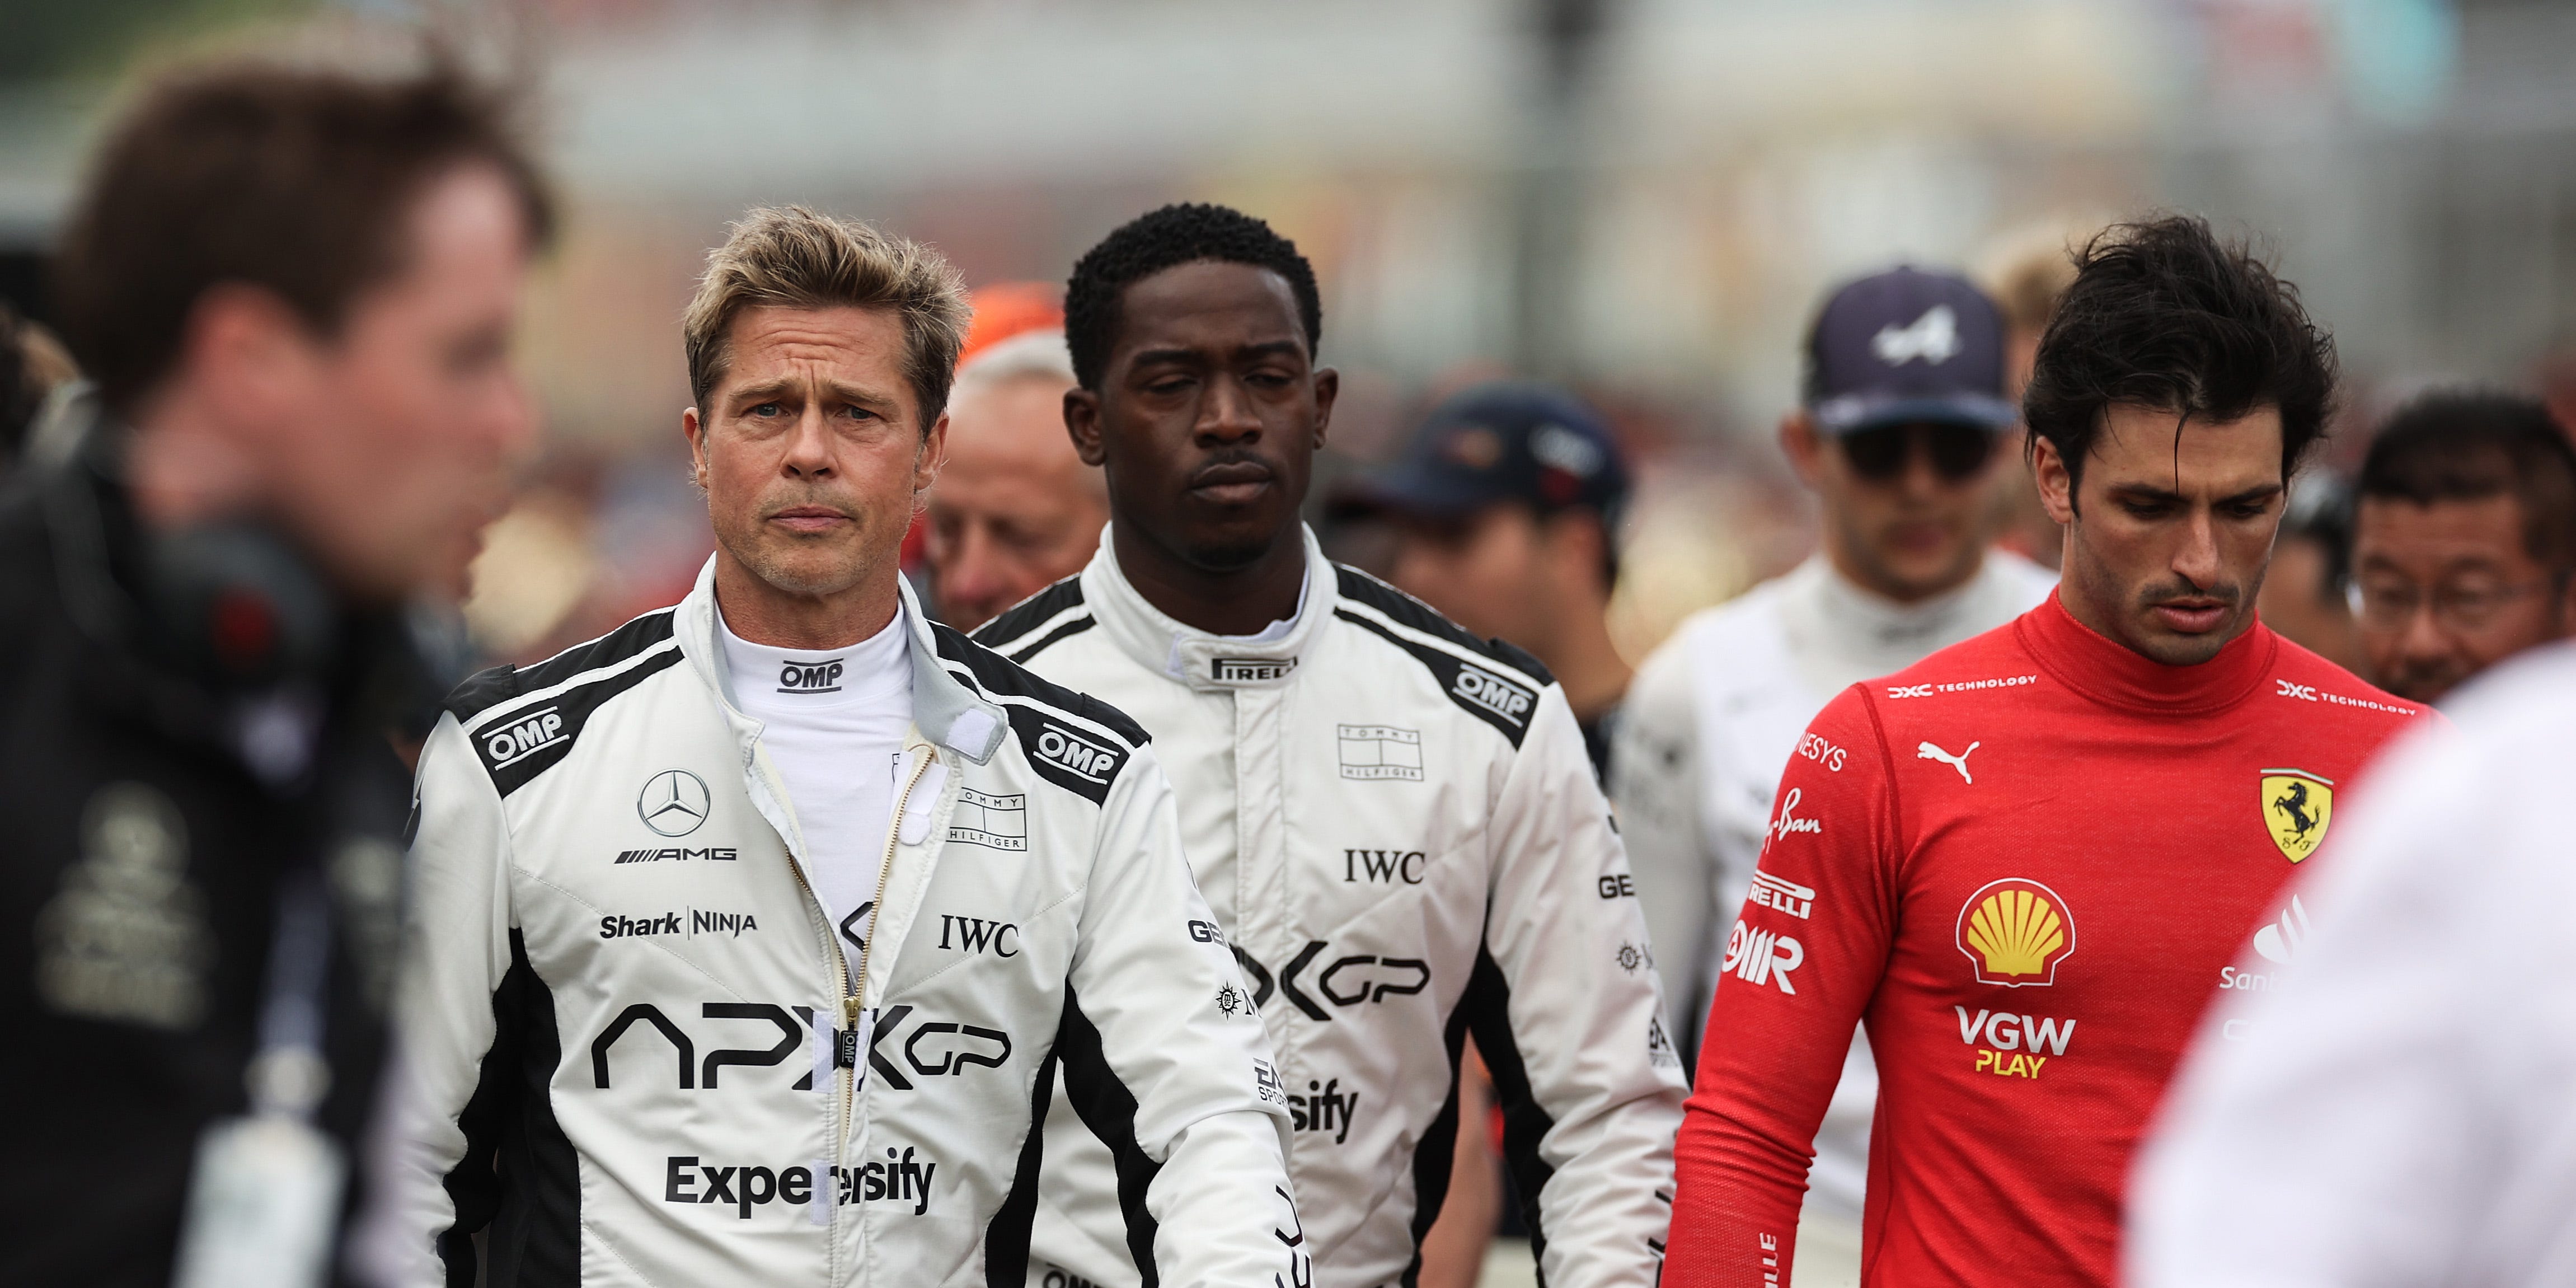 Brad Pitt's F1 Movie Has Reportedly Hit a Weird Production Speed Bump